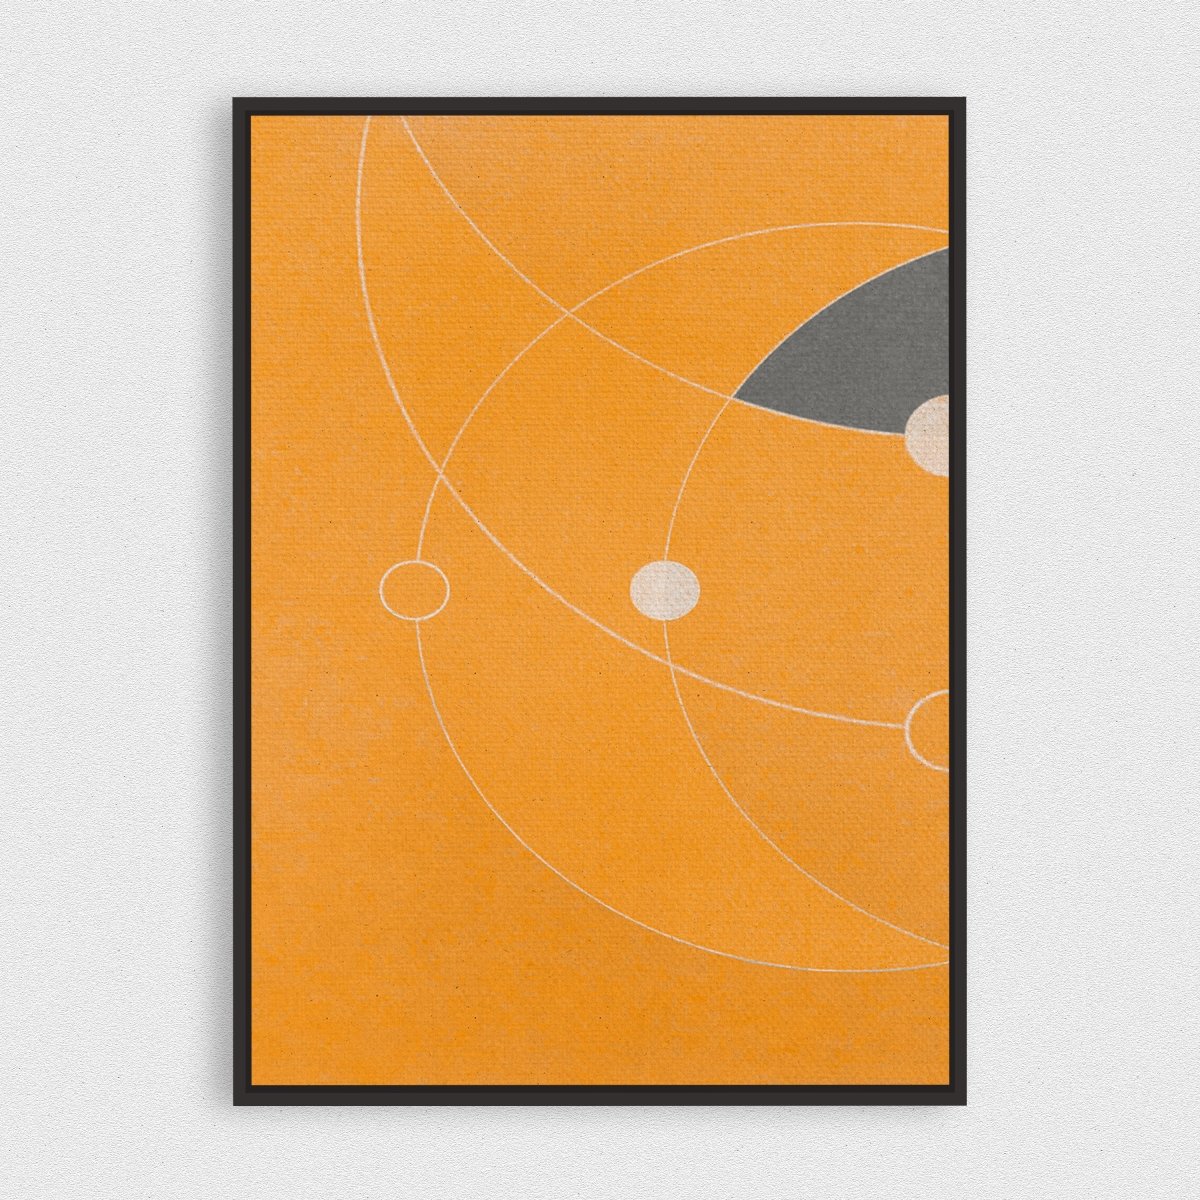 Orbiting 1 framed horizontal canvas wall art piece for sale at Vybe Interior